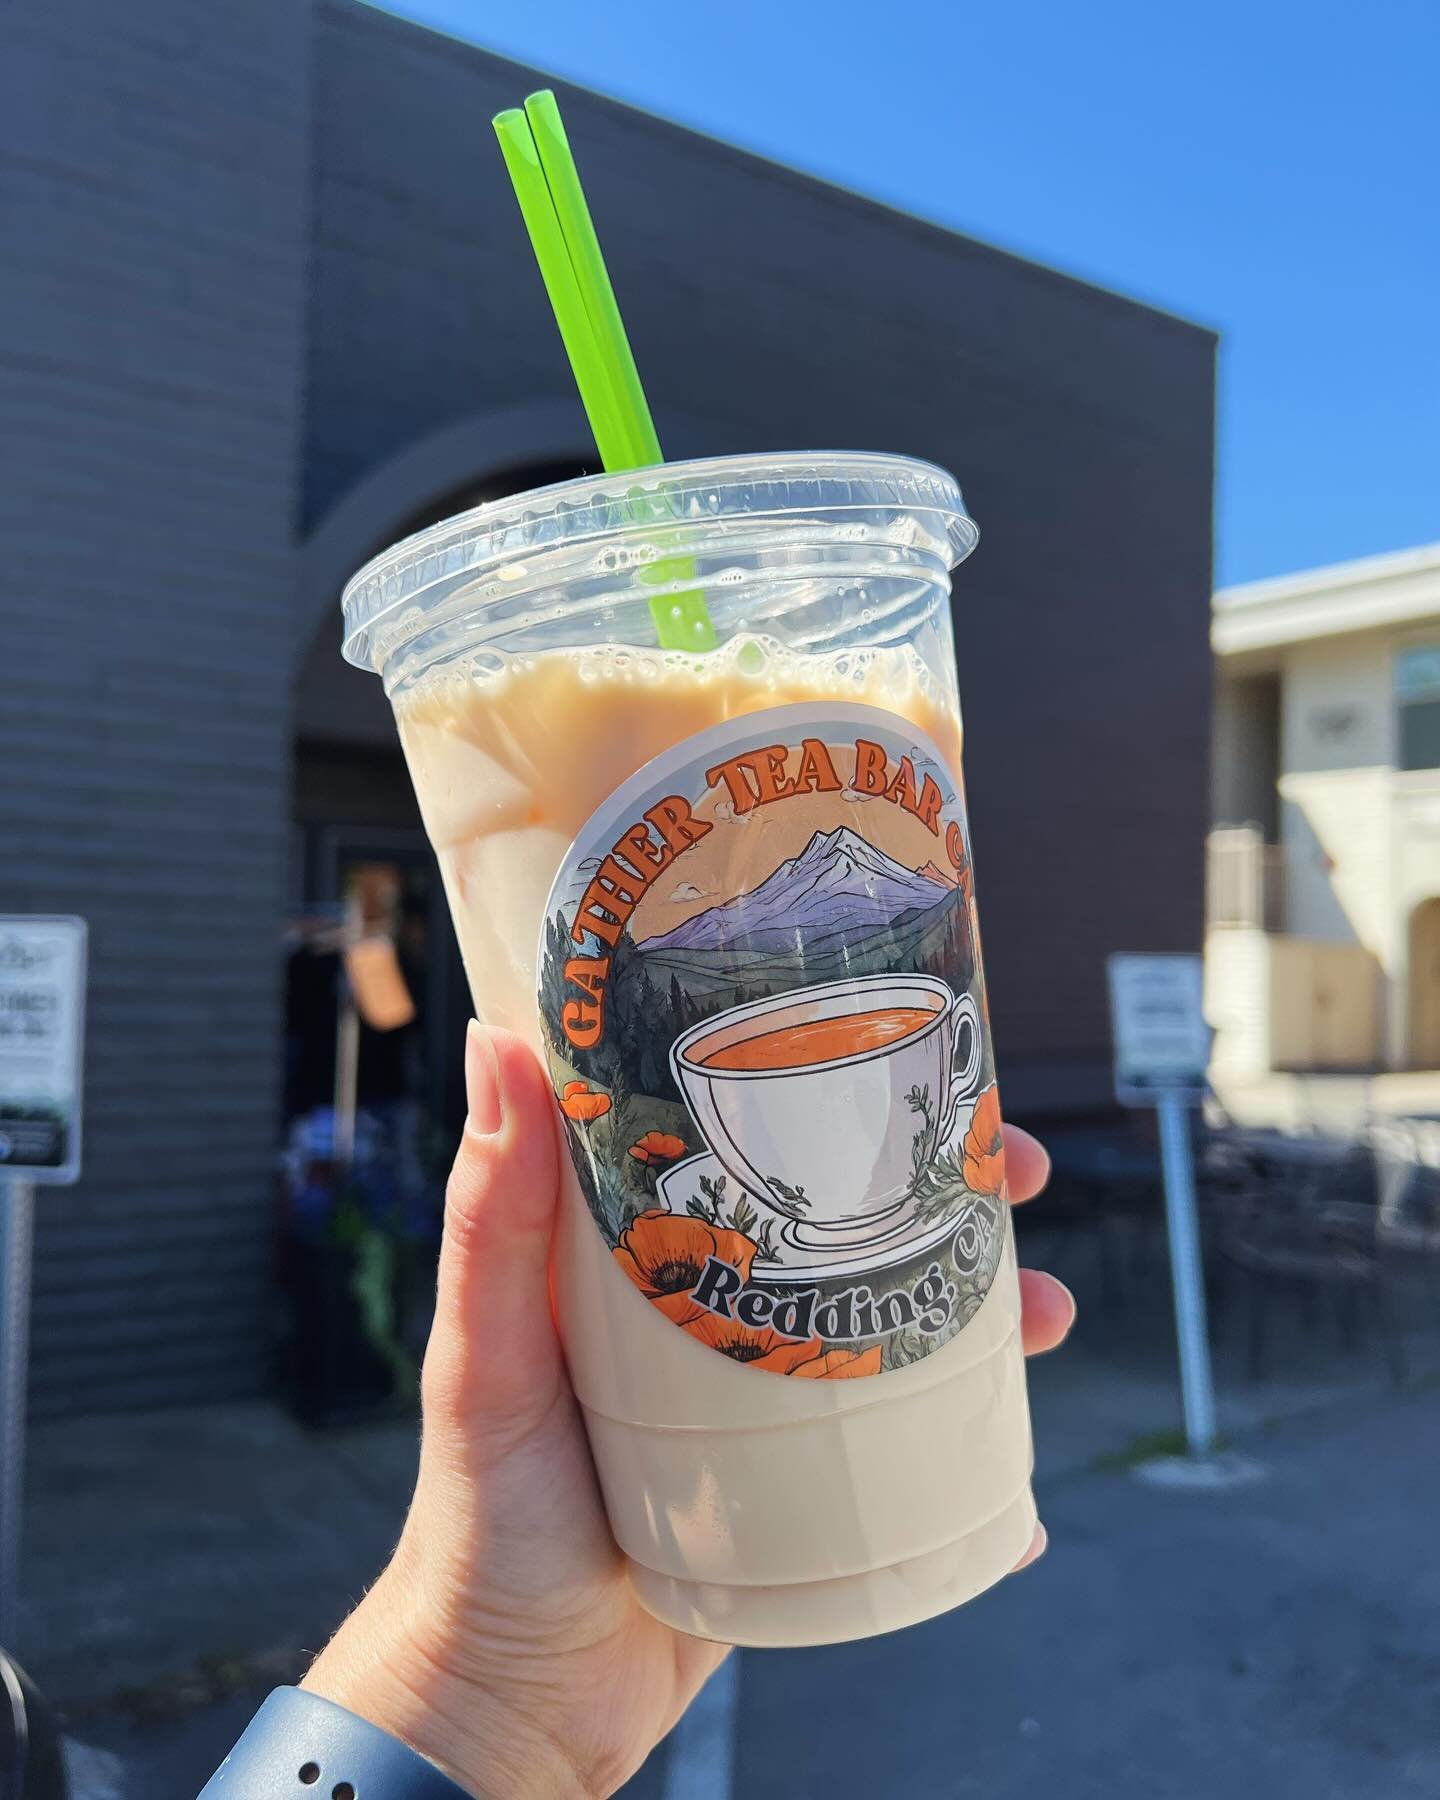 Chill out with our English Breakfast Tea Vanilla Iced Latte ☕️🧊 at Gather Tea Bar Caf&eacute;! Made with organic loose leaf tea, creamy milk, and a hint of vanilla, it&rsquo;s your perfect pick-me-up. Iced, creamy, and utterly delicious! 🌿✨ #Gather